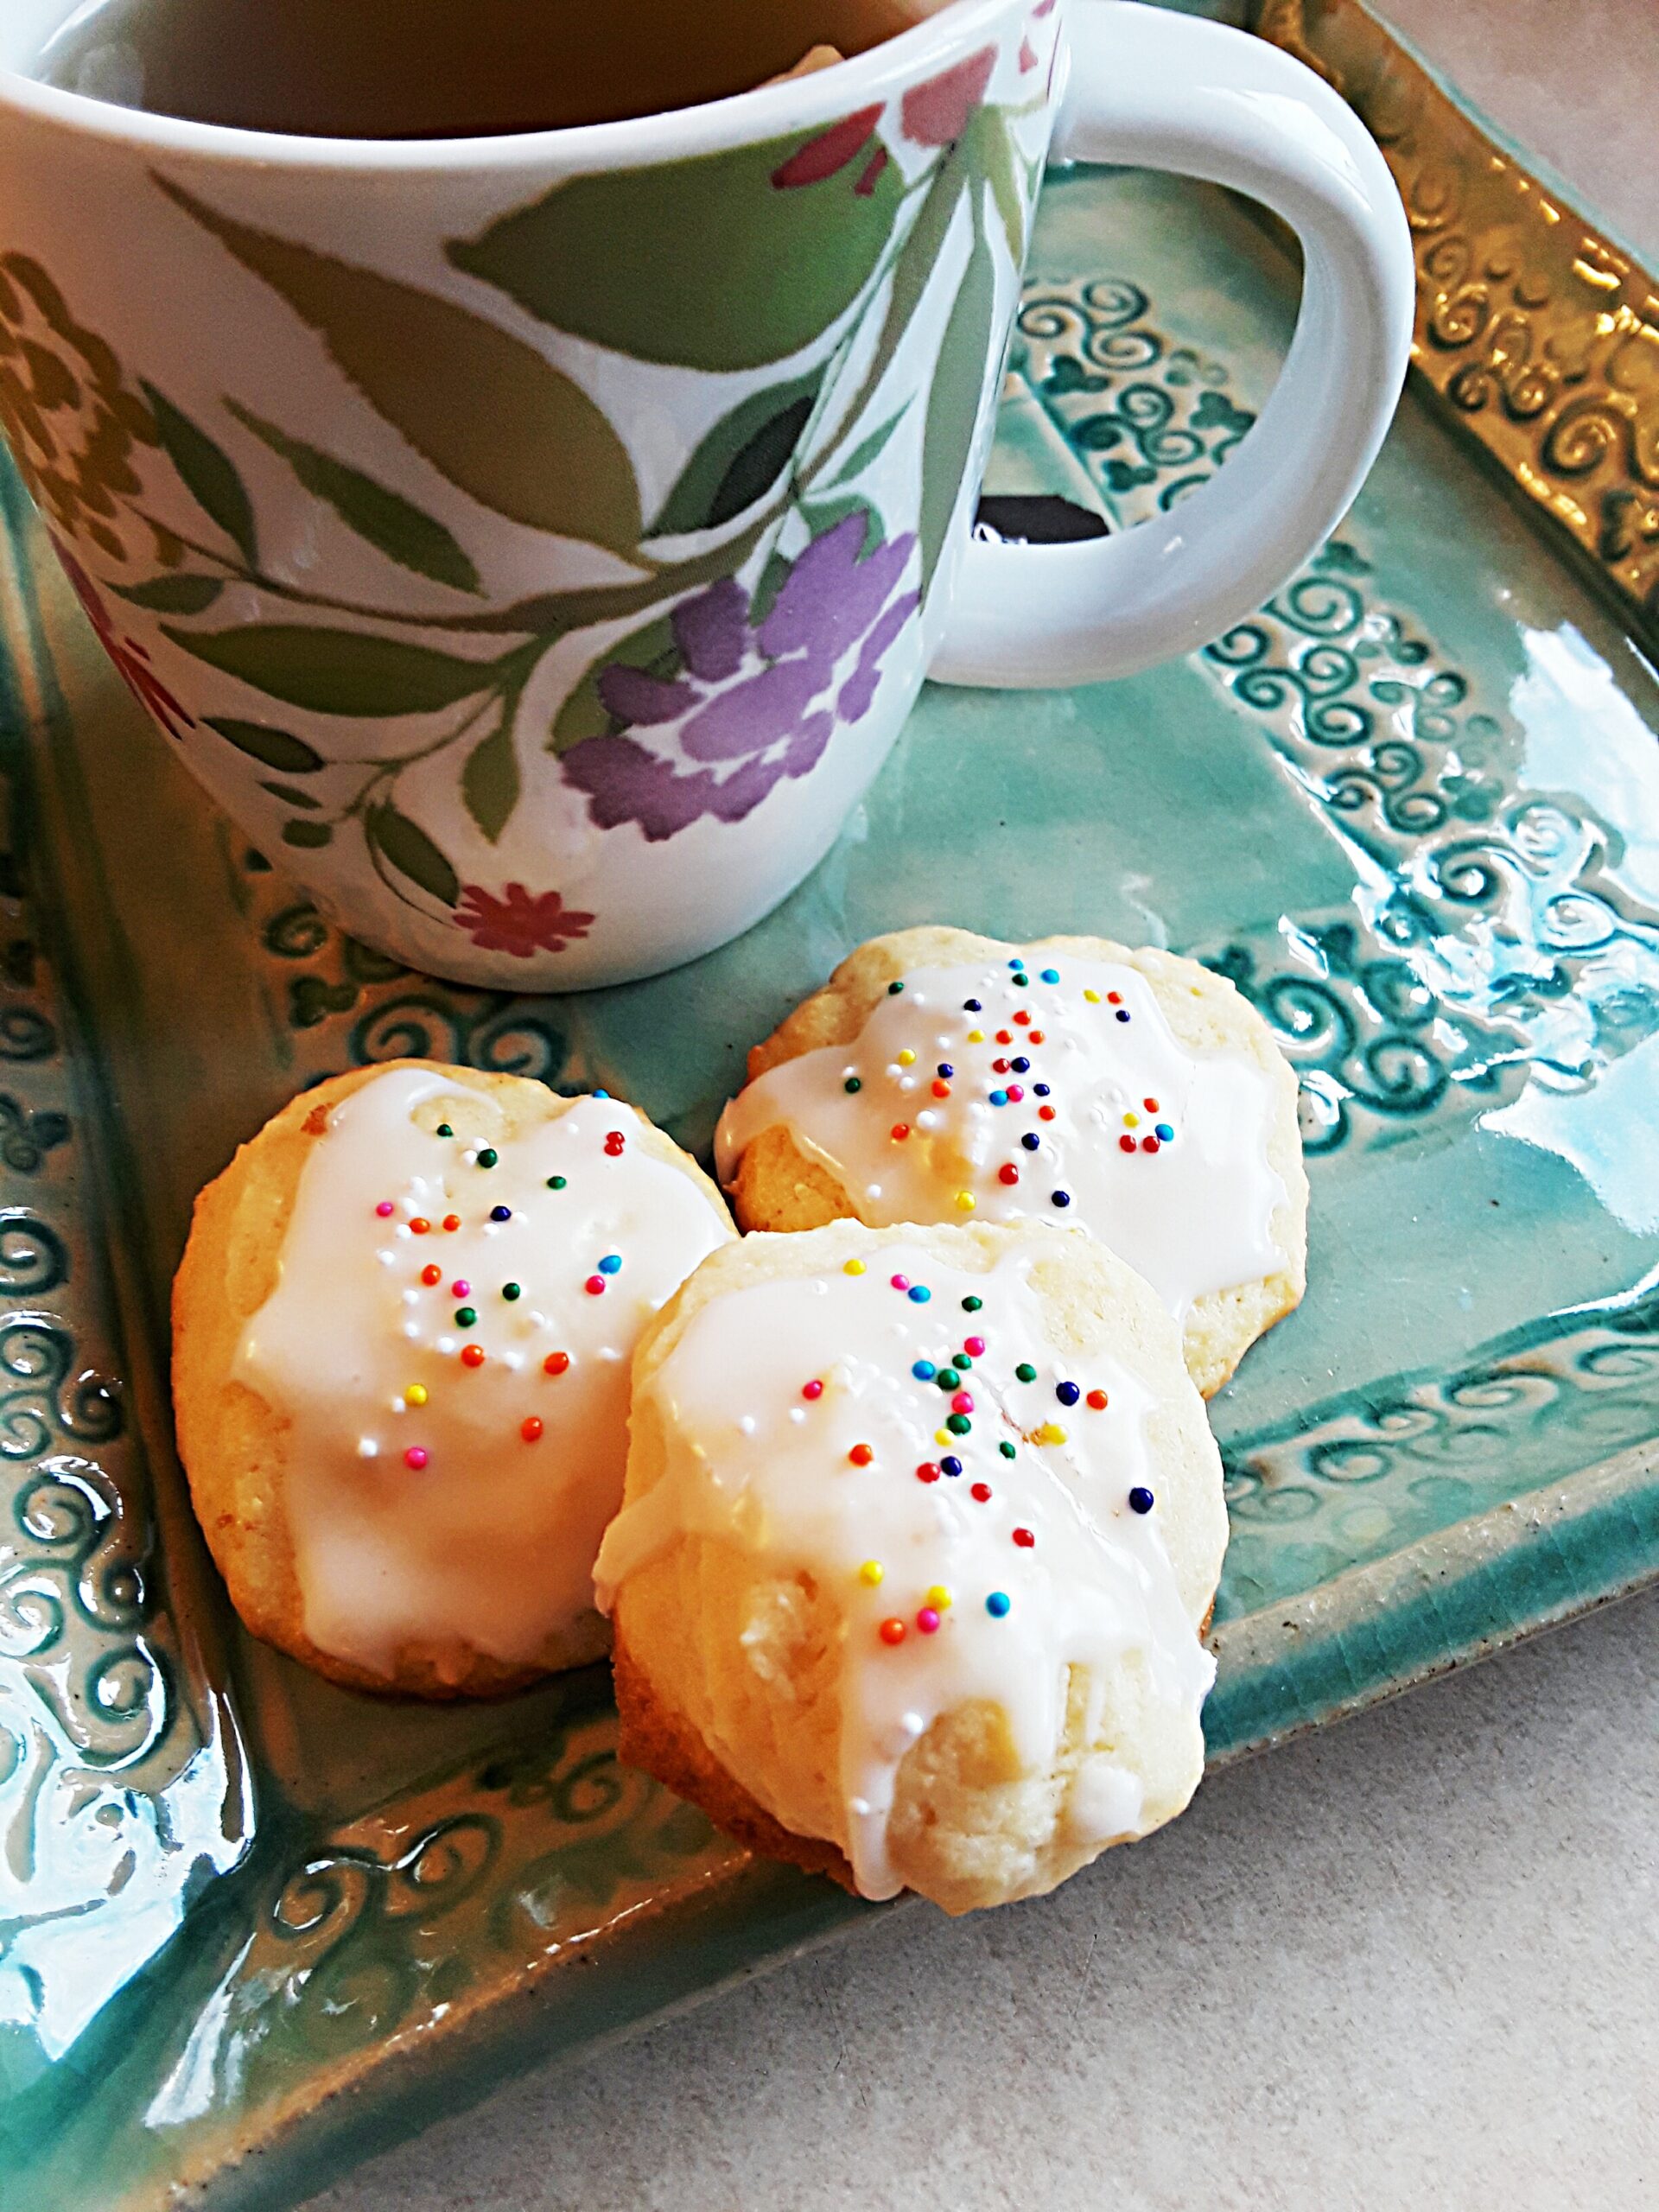 Lemon ginger tea tastes great with ricotta cheese cookies